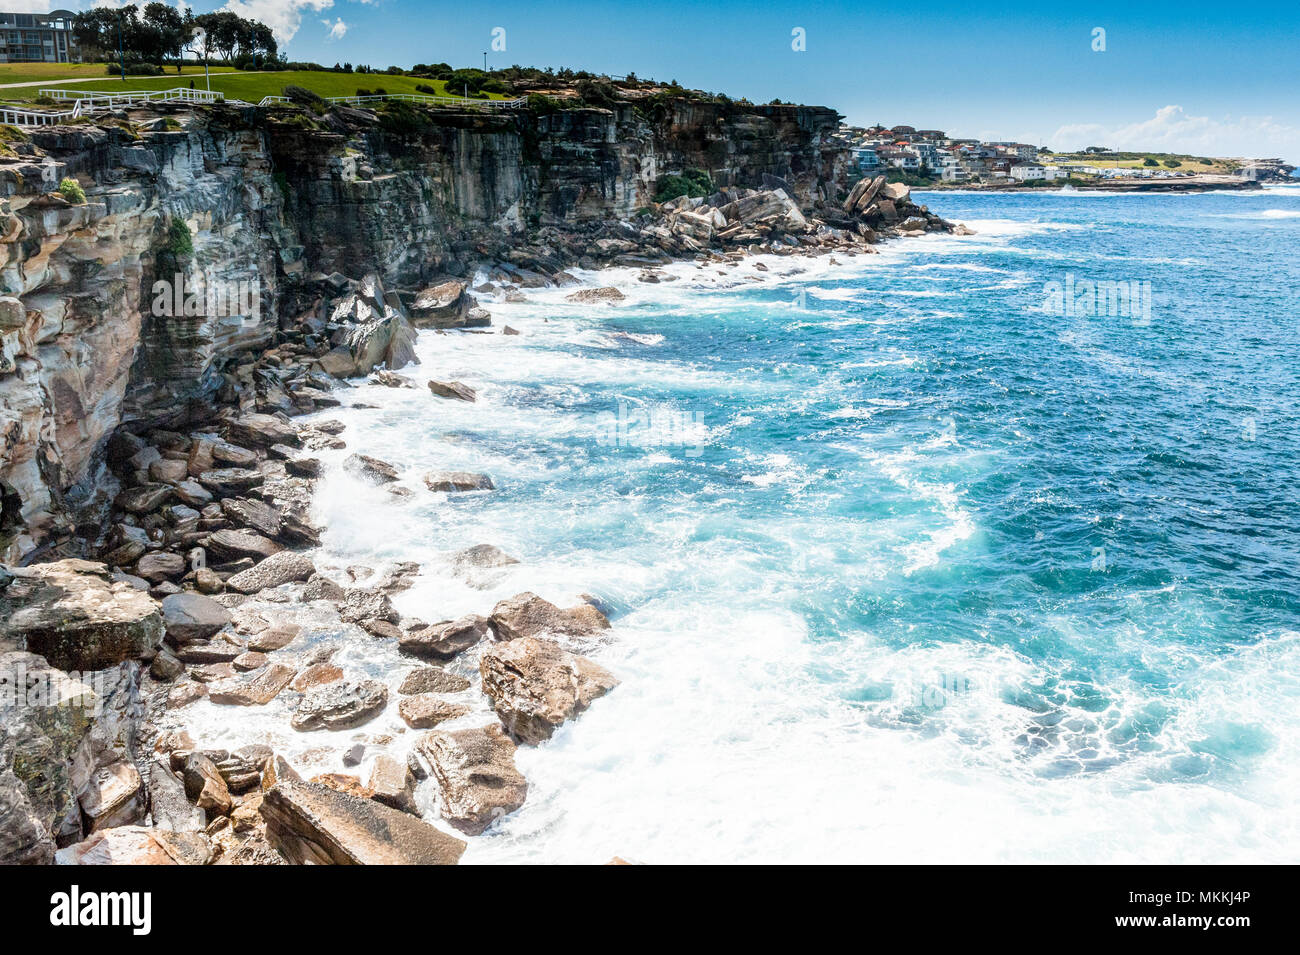 The stunning scenery along the famous Coogee beach walk to Bondi Beach, Sydney Australia. In this shot massive rocks and boulders have fallen. Stock Photo